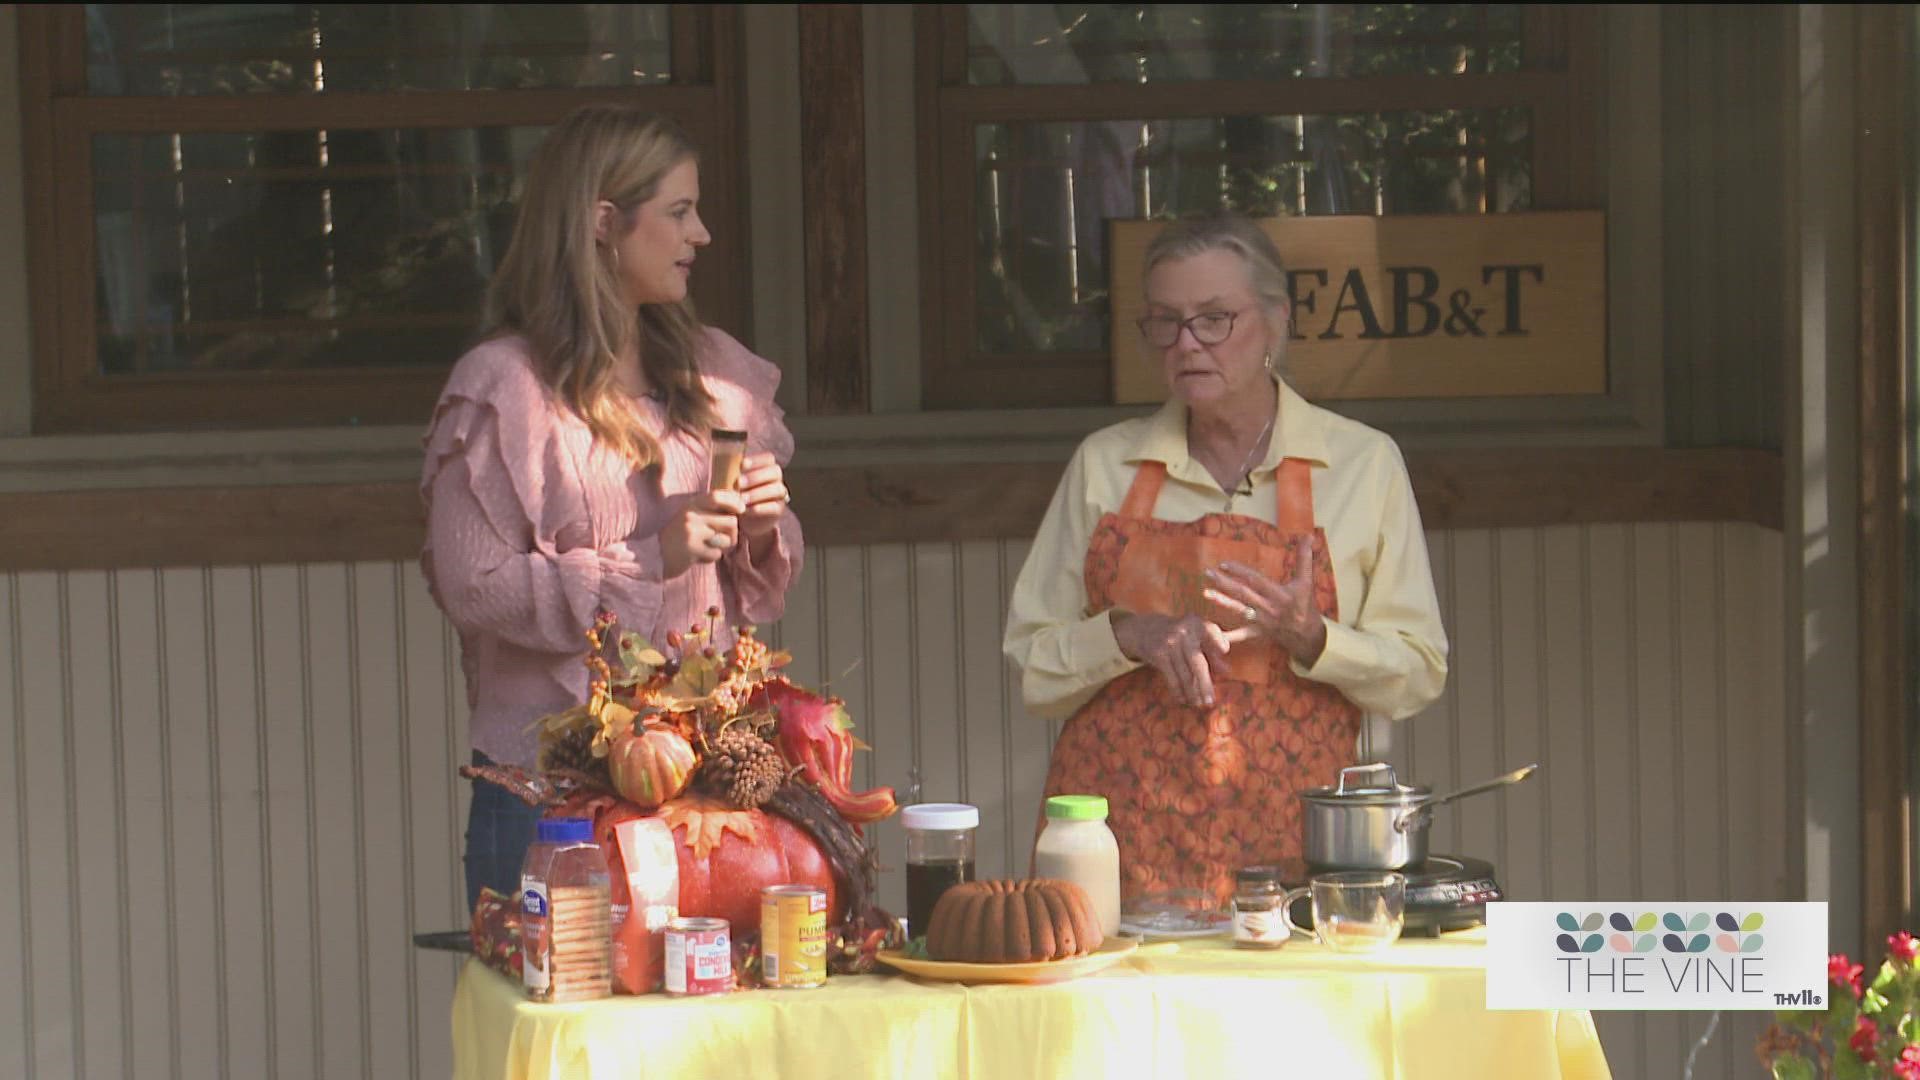 Debbie Arnold from Dining With Debbie is here and we are talking everything pumpkin spice this morning!